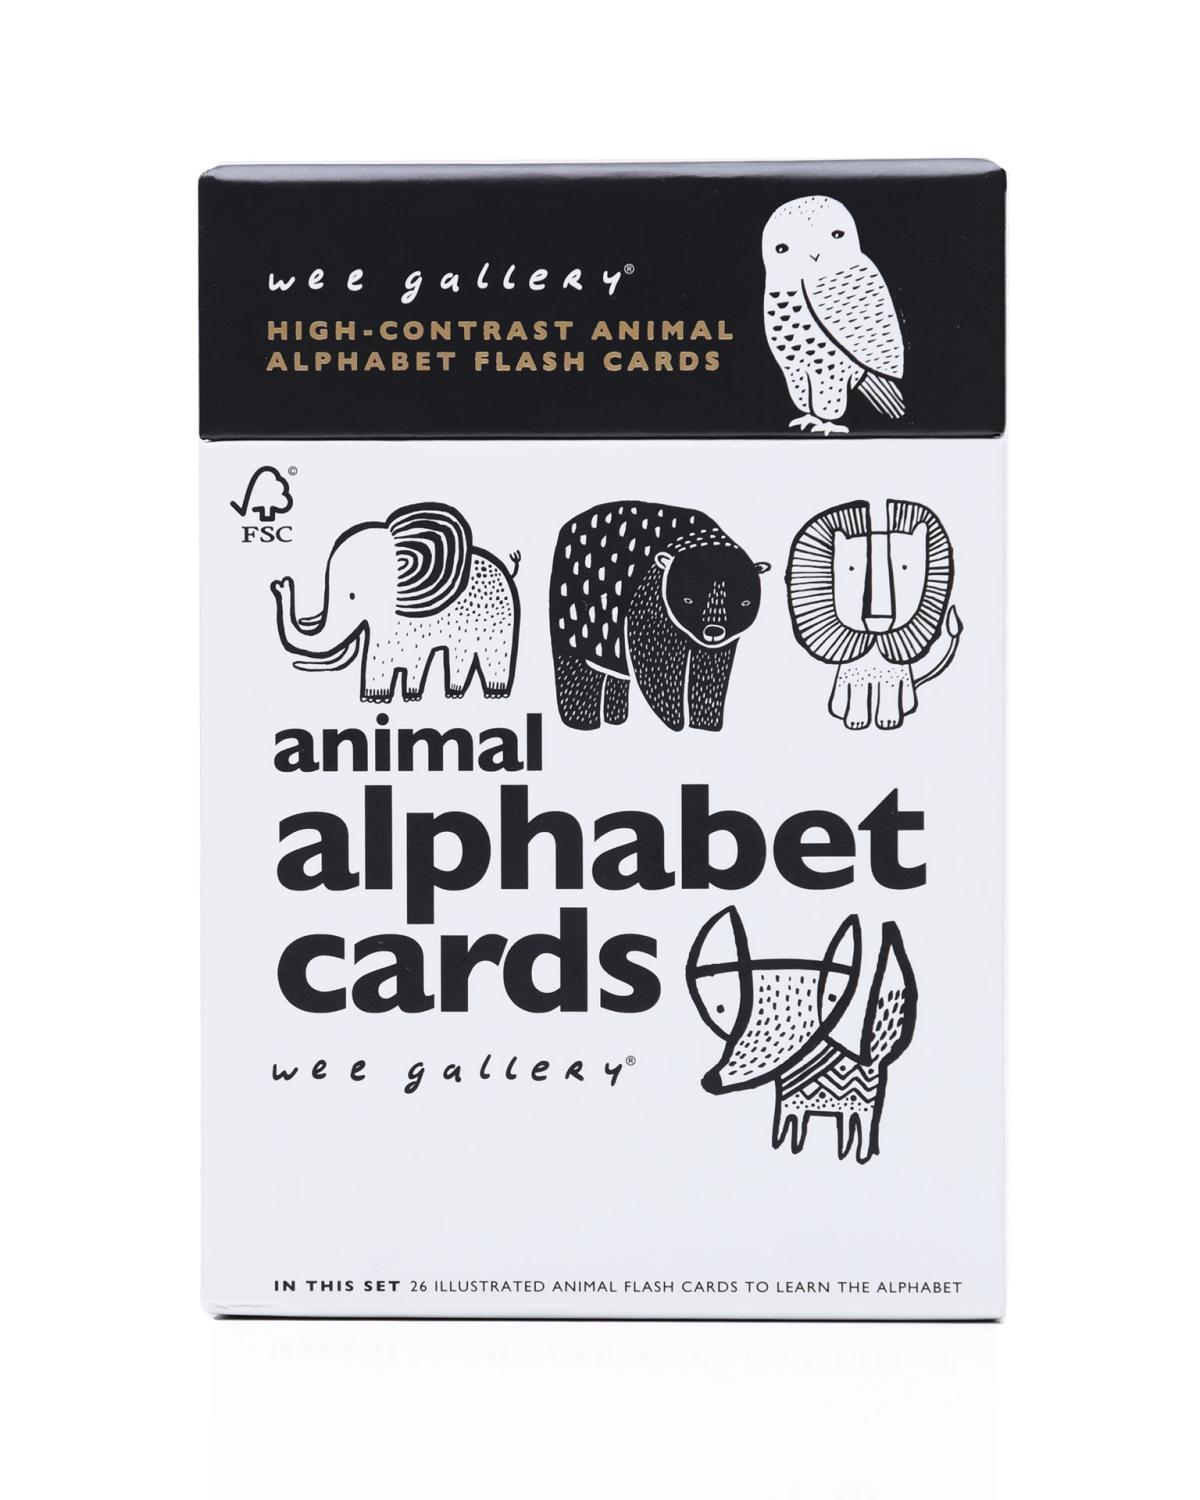 Little wee gallery play animal alphabet cards